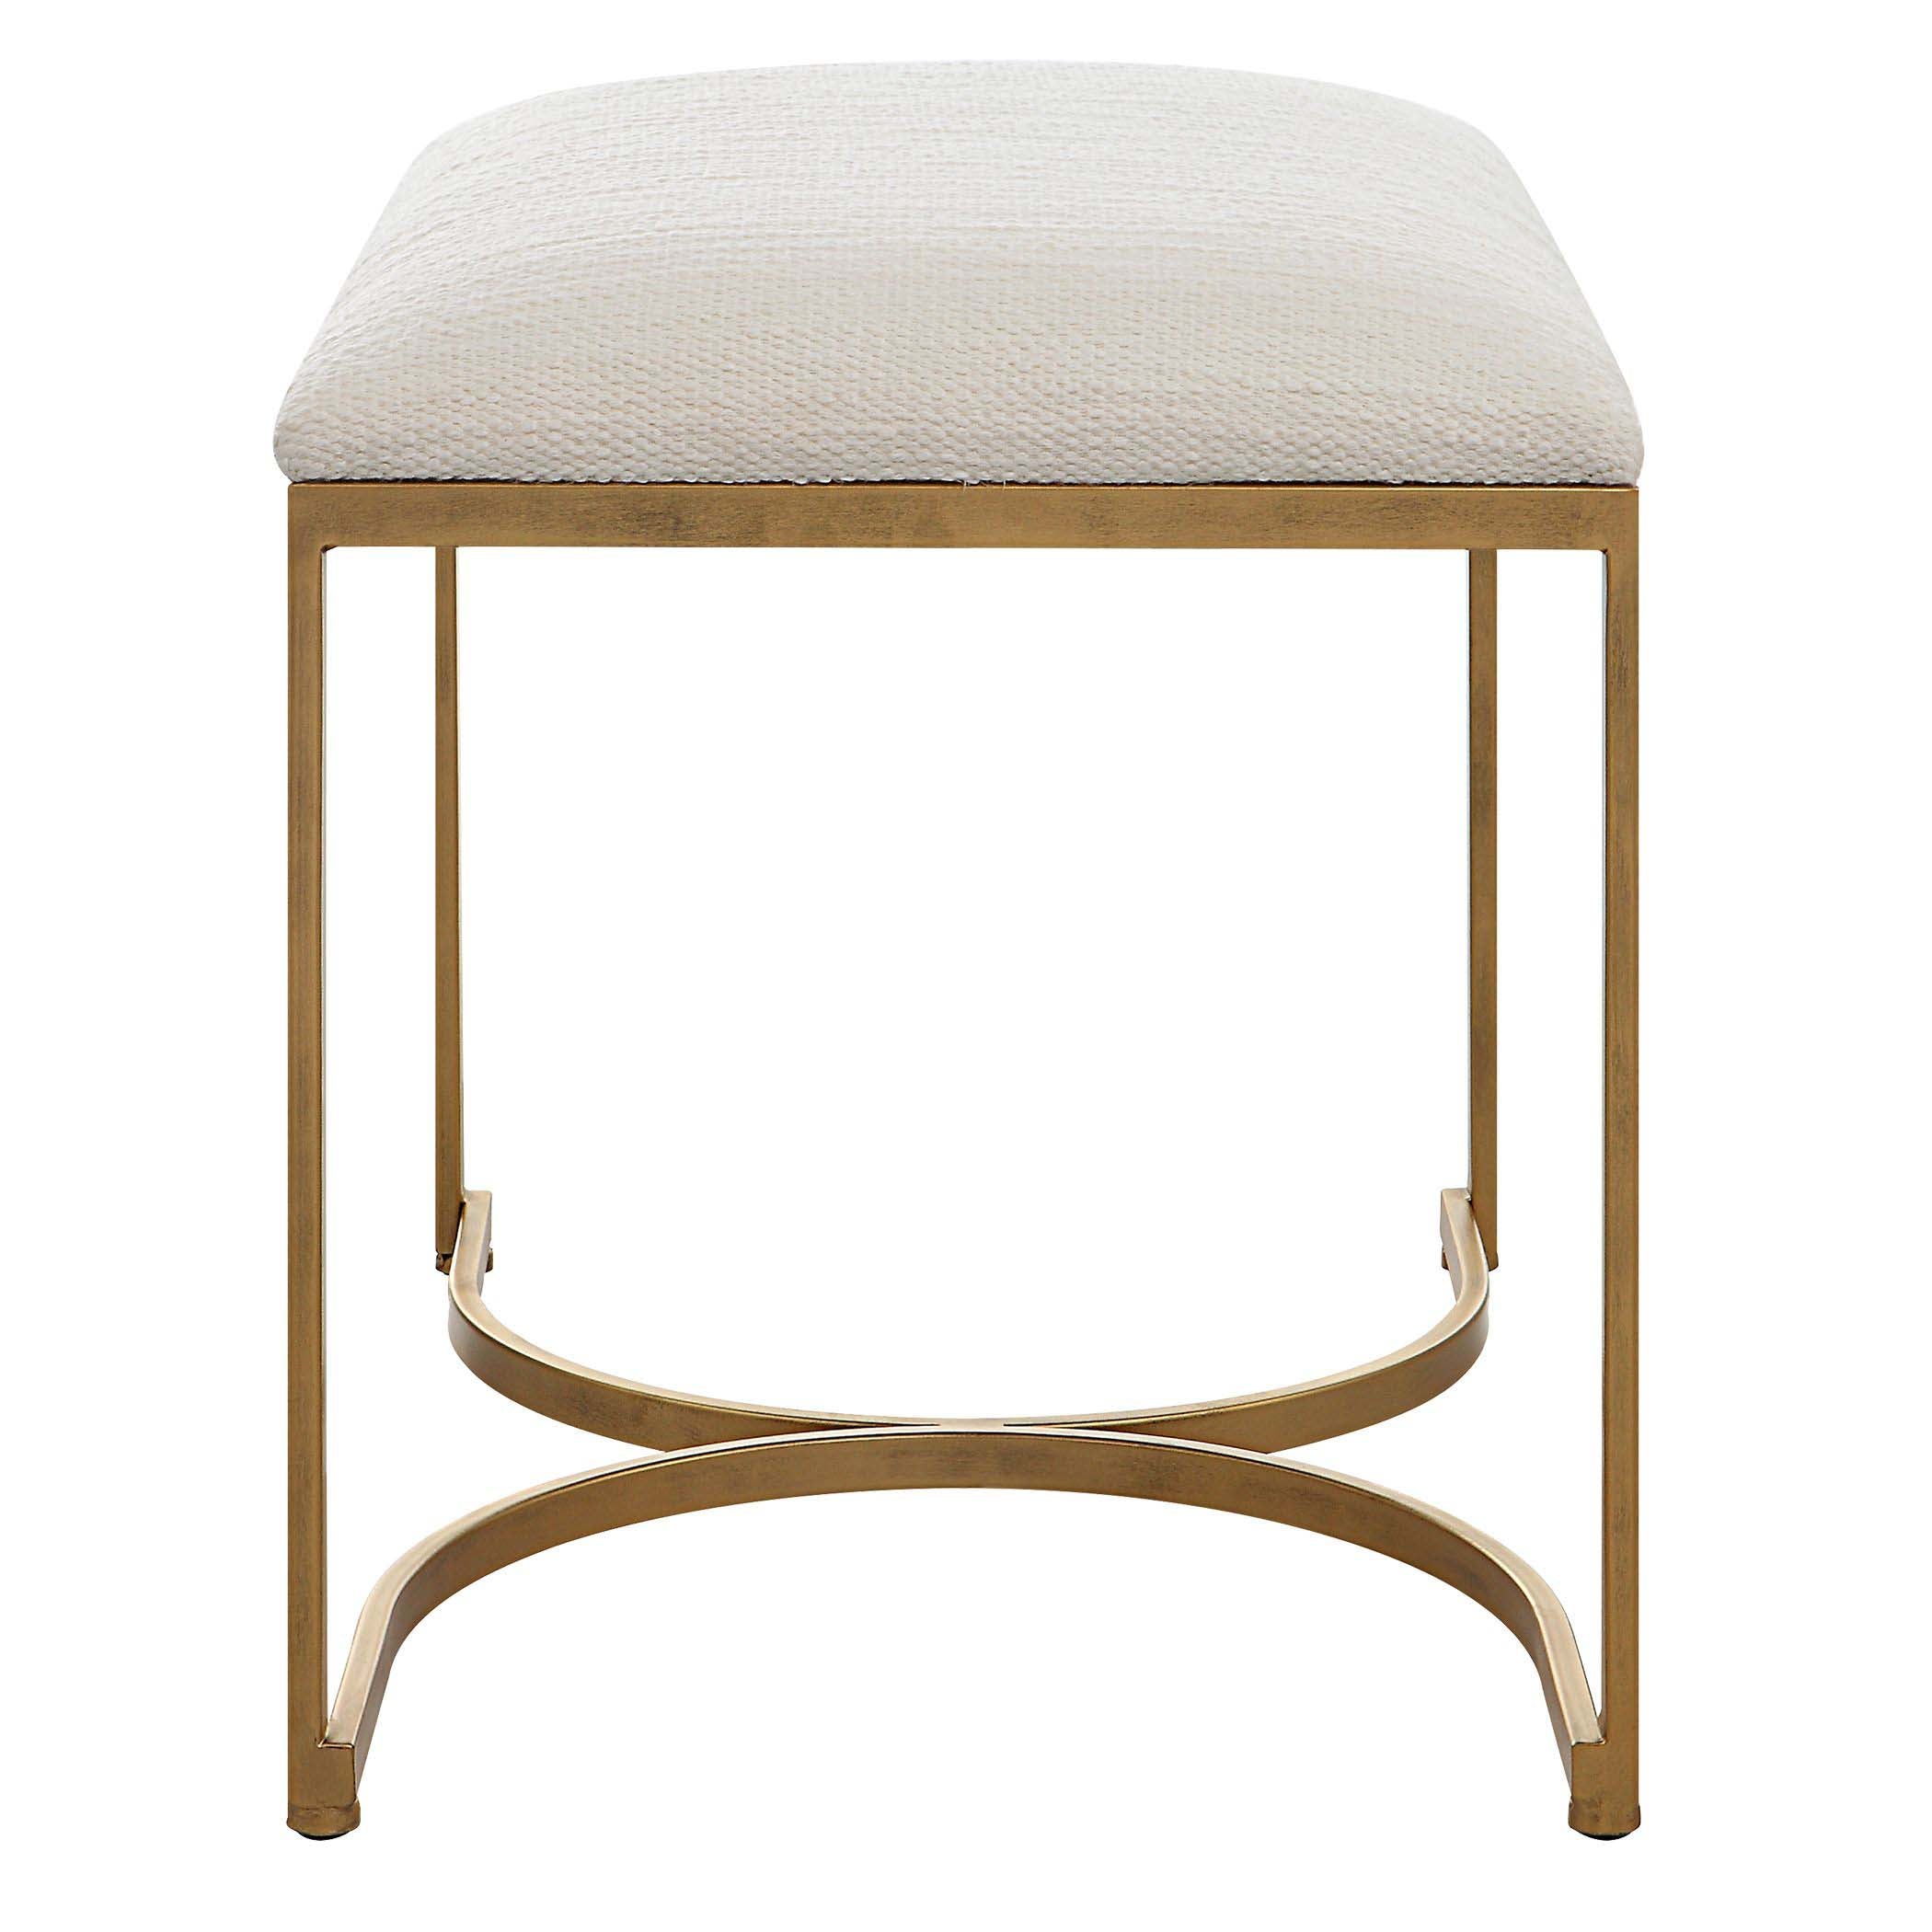 Decor Market Accent Bench - Antique Brushed Brass